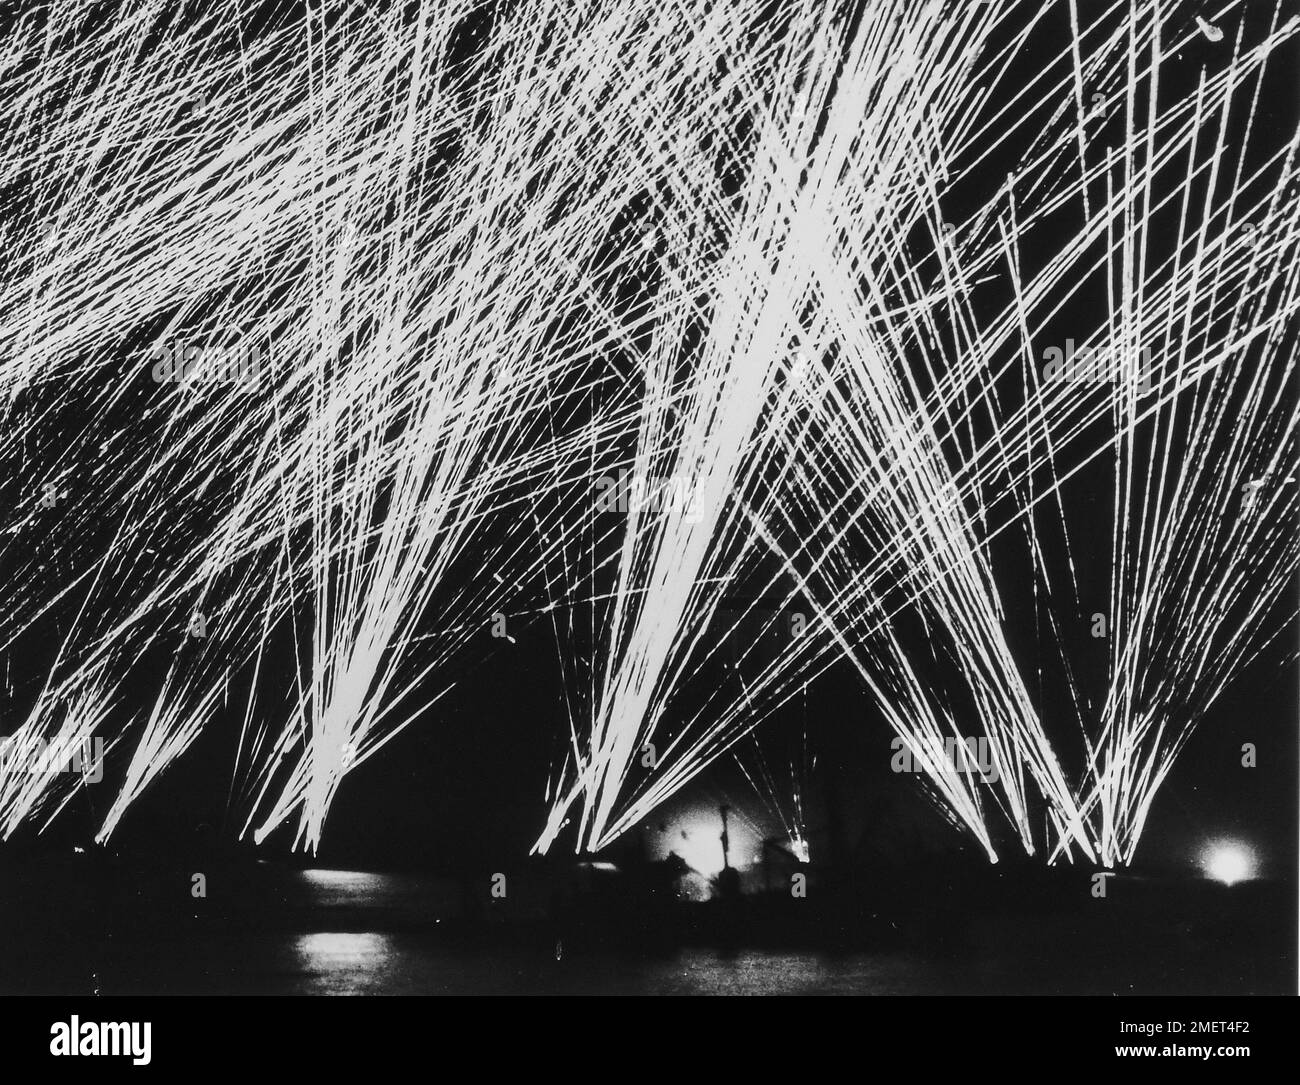 Photograph of Allied Guns Firing at Nazi Planes Off the Cherbourg Peninsula. Off Cherbourg, The Luftwaffe Attacks at Night- Allied guns weave a tapestry of flame in the night skies off the Cherbourg Peninsula, as Nazi planes appear overhead to bomb a group of invasion ships. In the foreground is the sinking hulk of an American ship, mortally wounded by a bomb hit. The glare of two bomb flashes breaks the black in the distance. This spectacular photo of battle pyrotechnics was made by a Coast Guard combat photographer under fire in this channel action. 1939 - 1967. Stock Photo